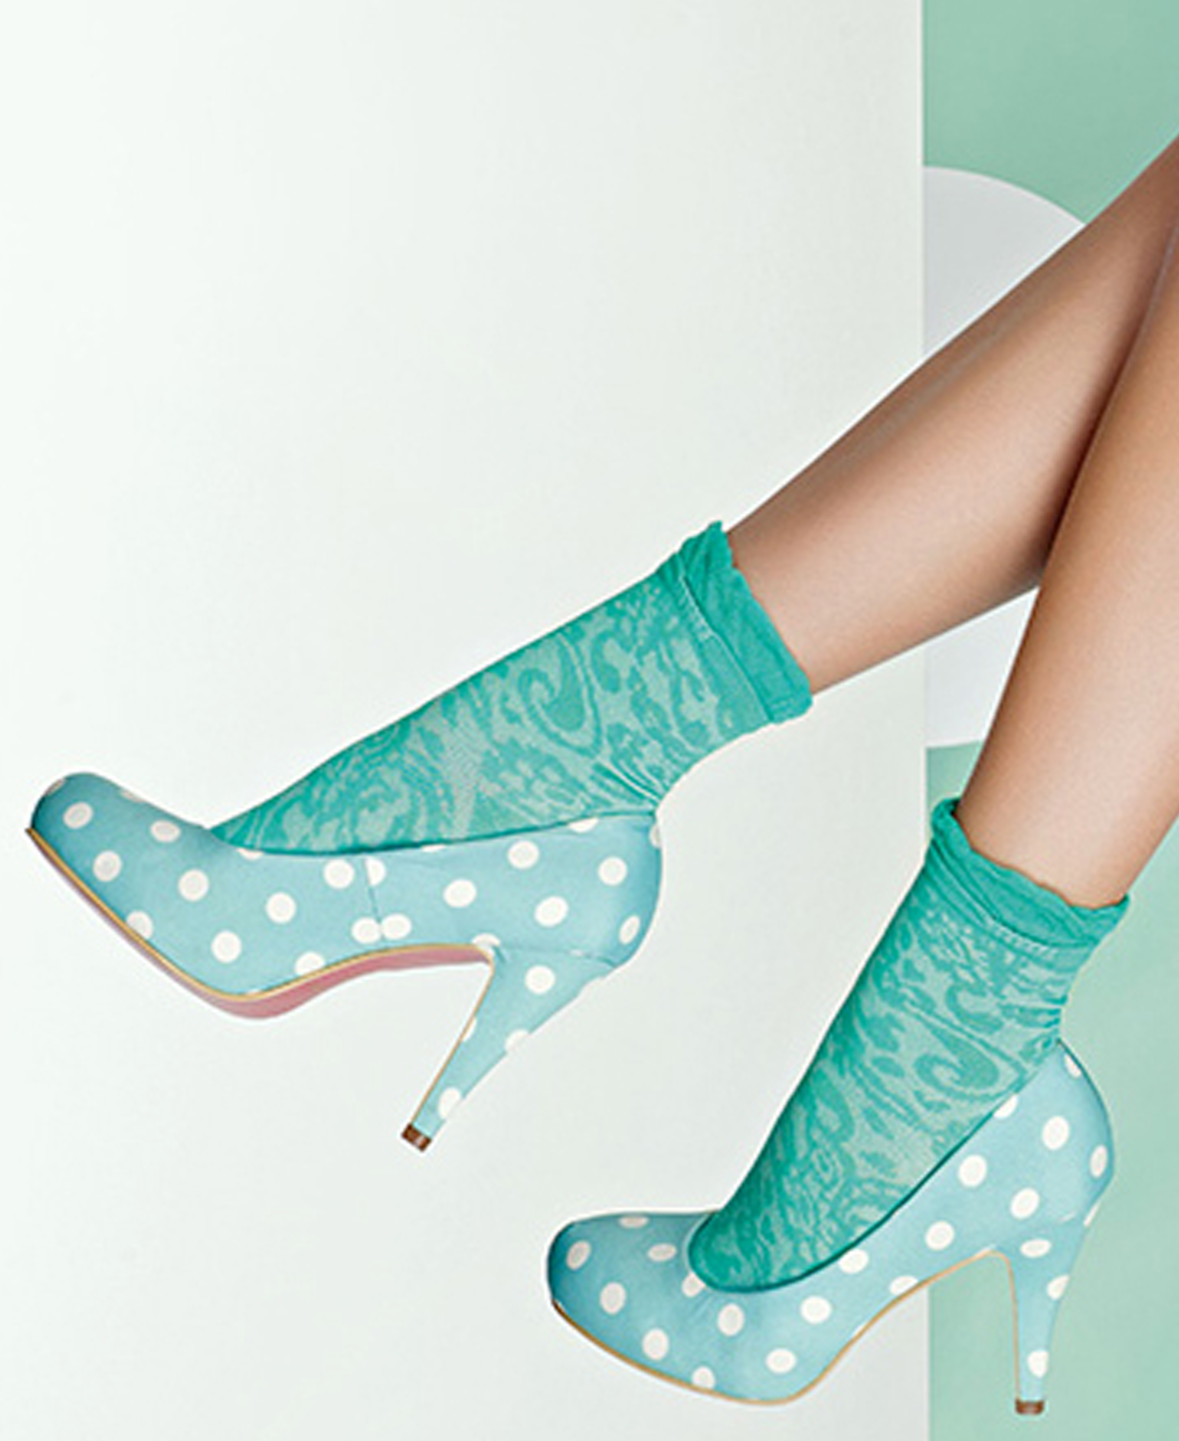 Omsa Damasc Calzino - Cotton fashion ankle socks with a subtle floral pattern, frill cuff, shaped heel and flat toe seam.